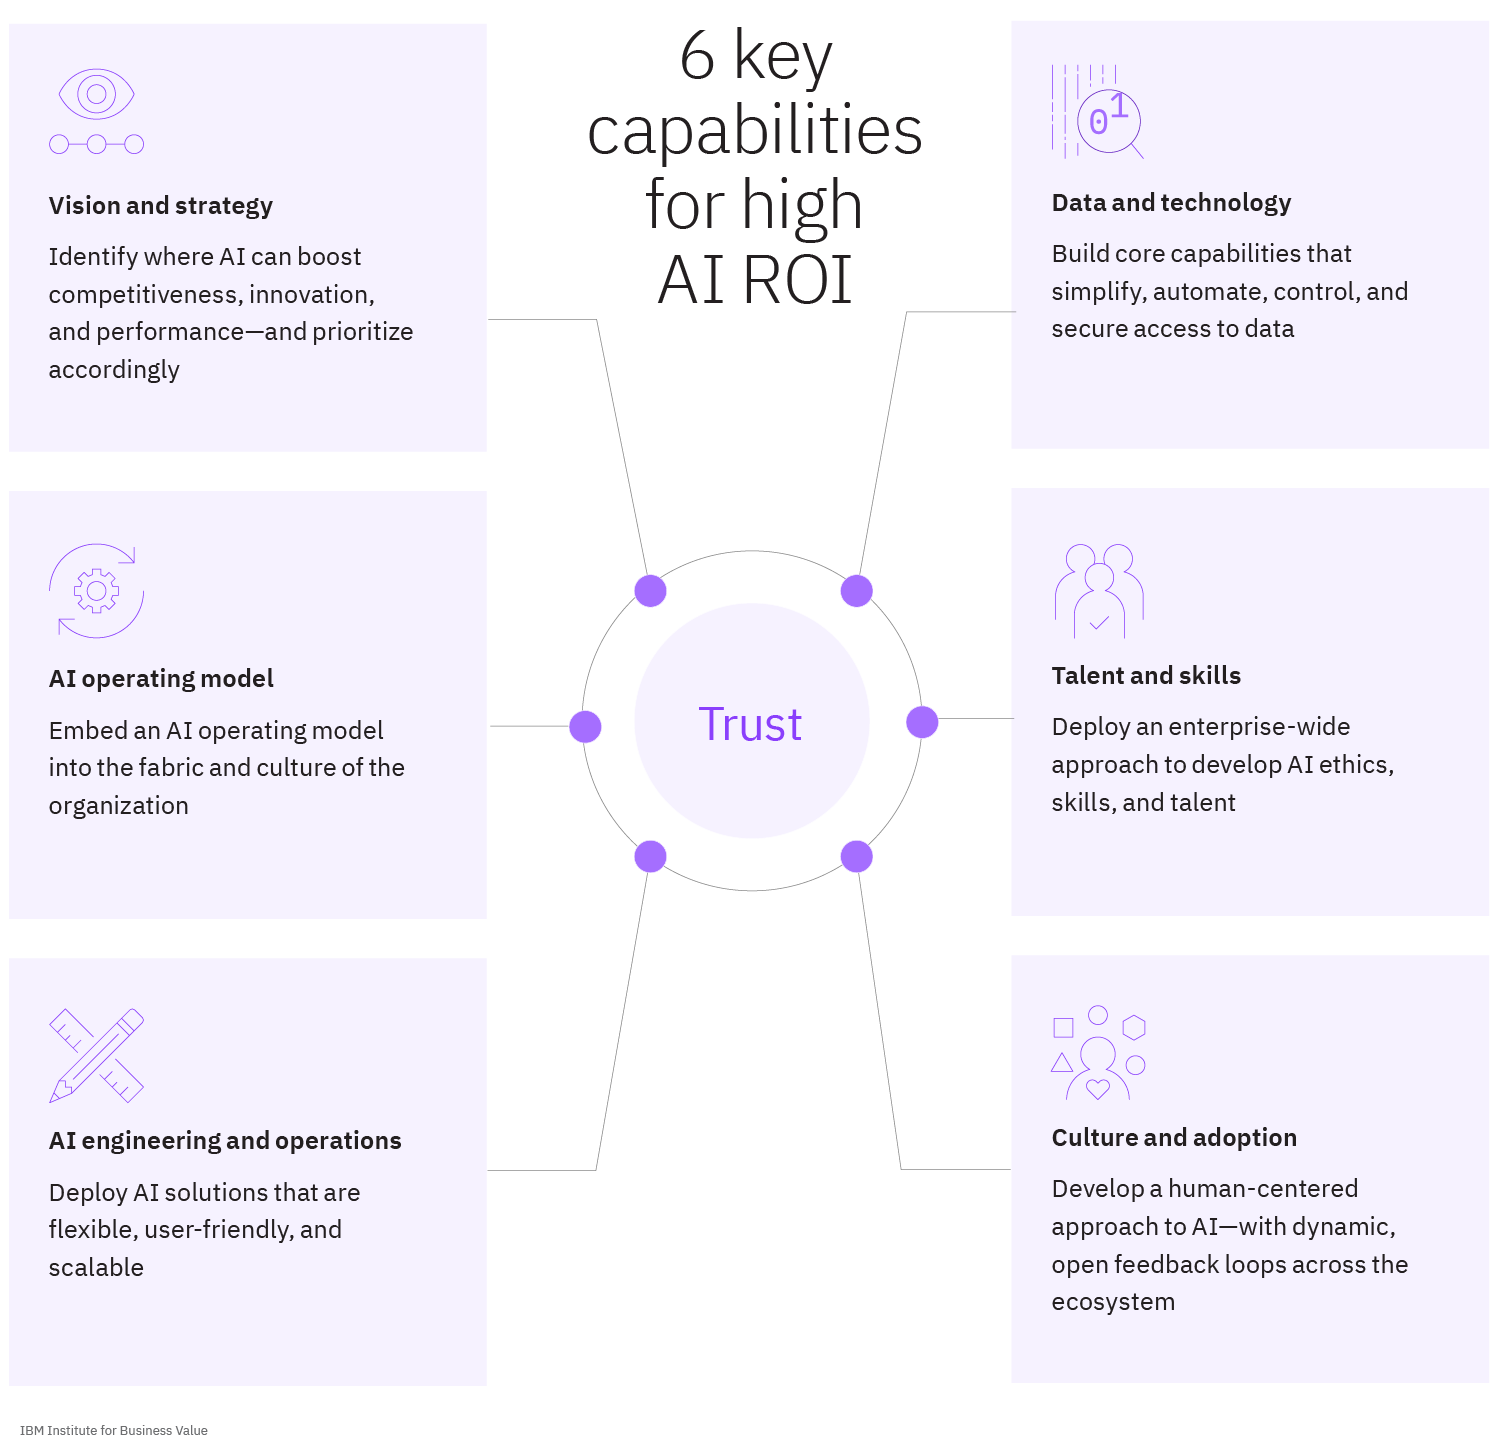 Six key capabilities for high AI ROI: Vision and strategy, AI operating model, AI engineering and operations, data and technology, talent and skills, and culture and adoption